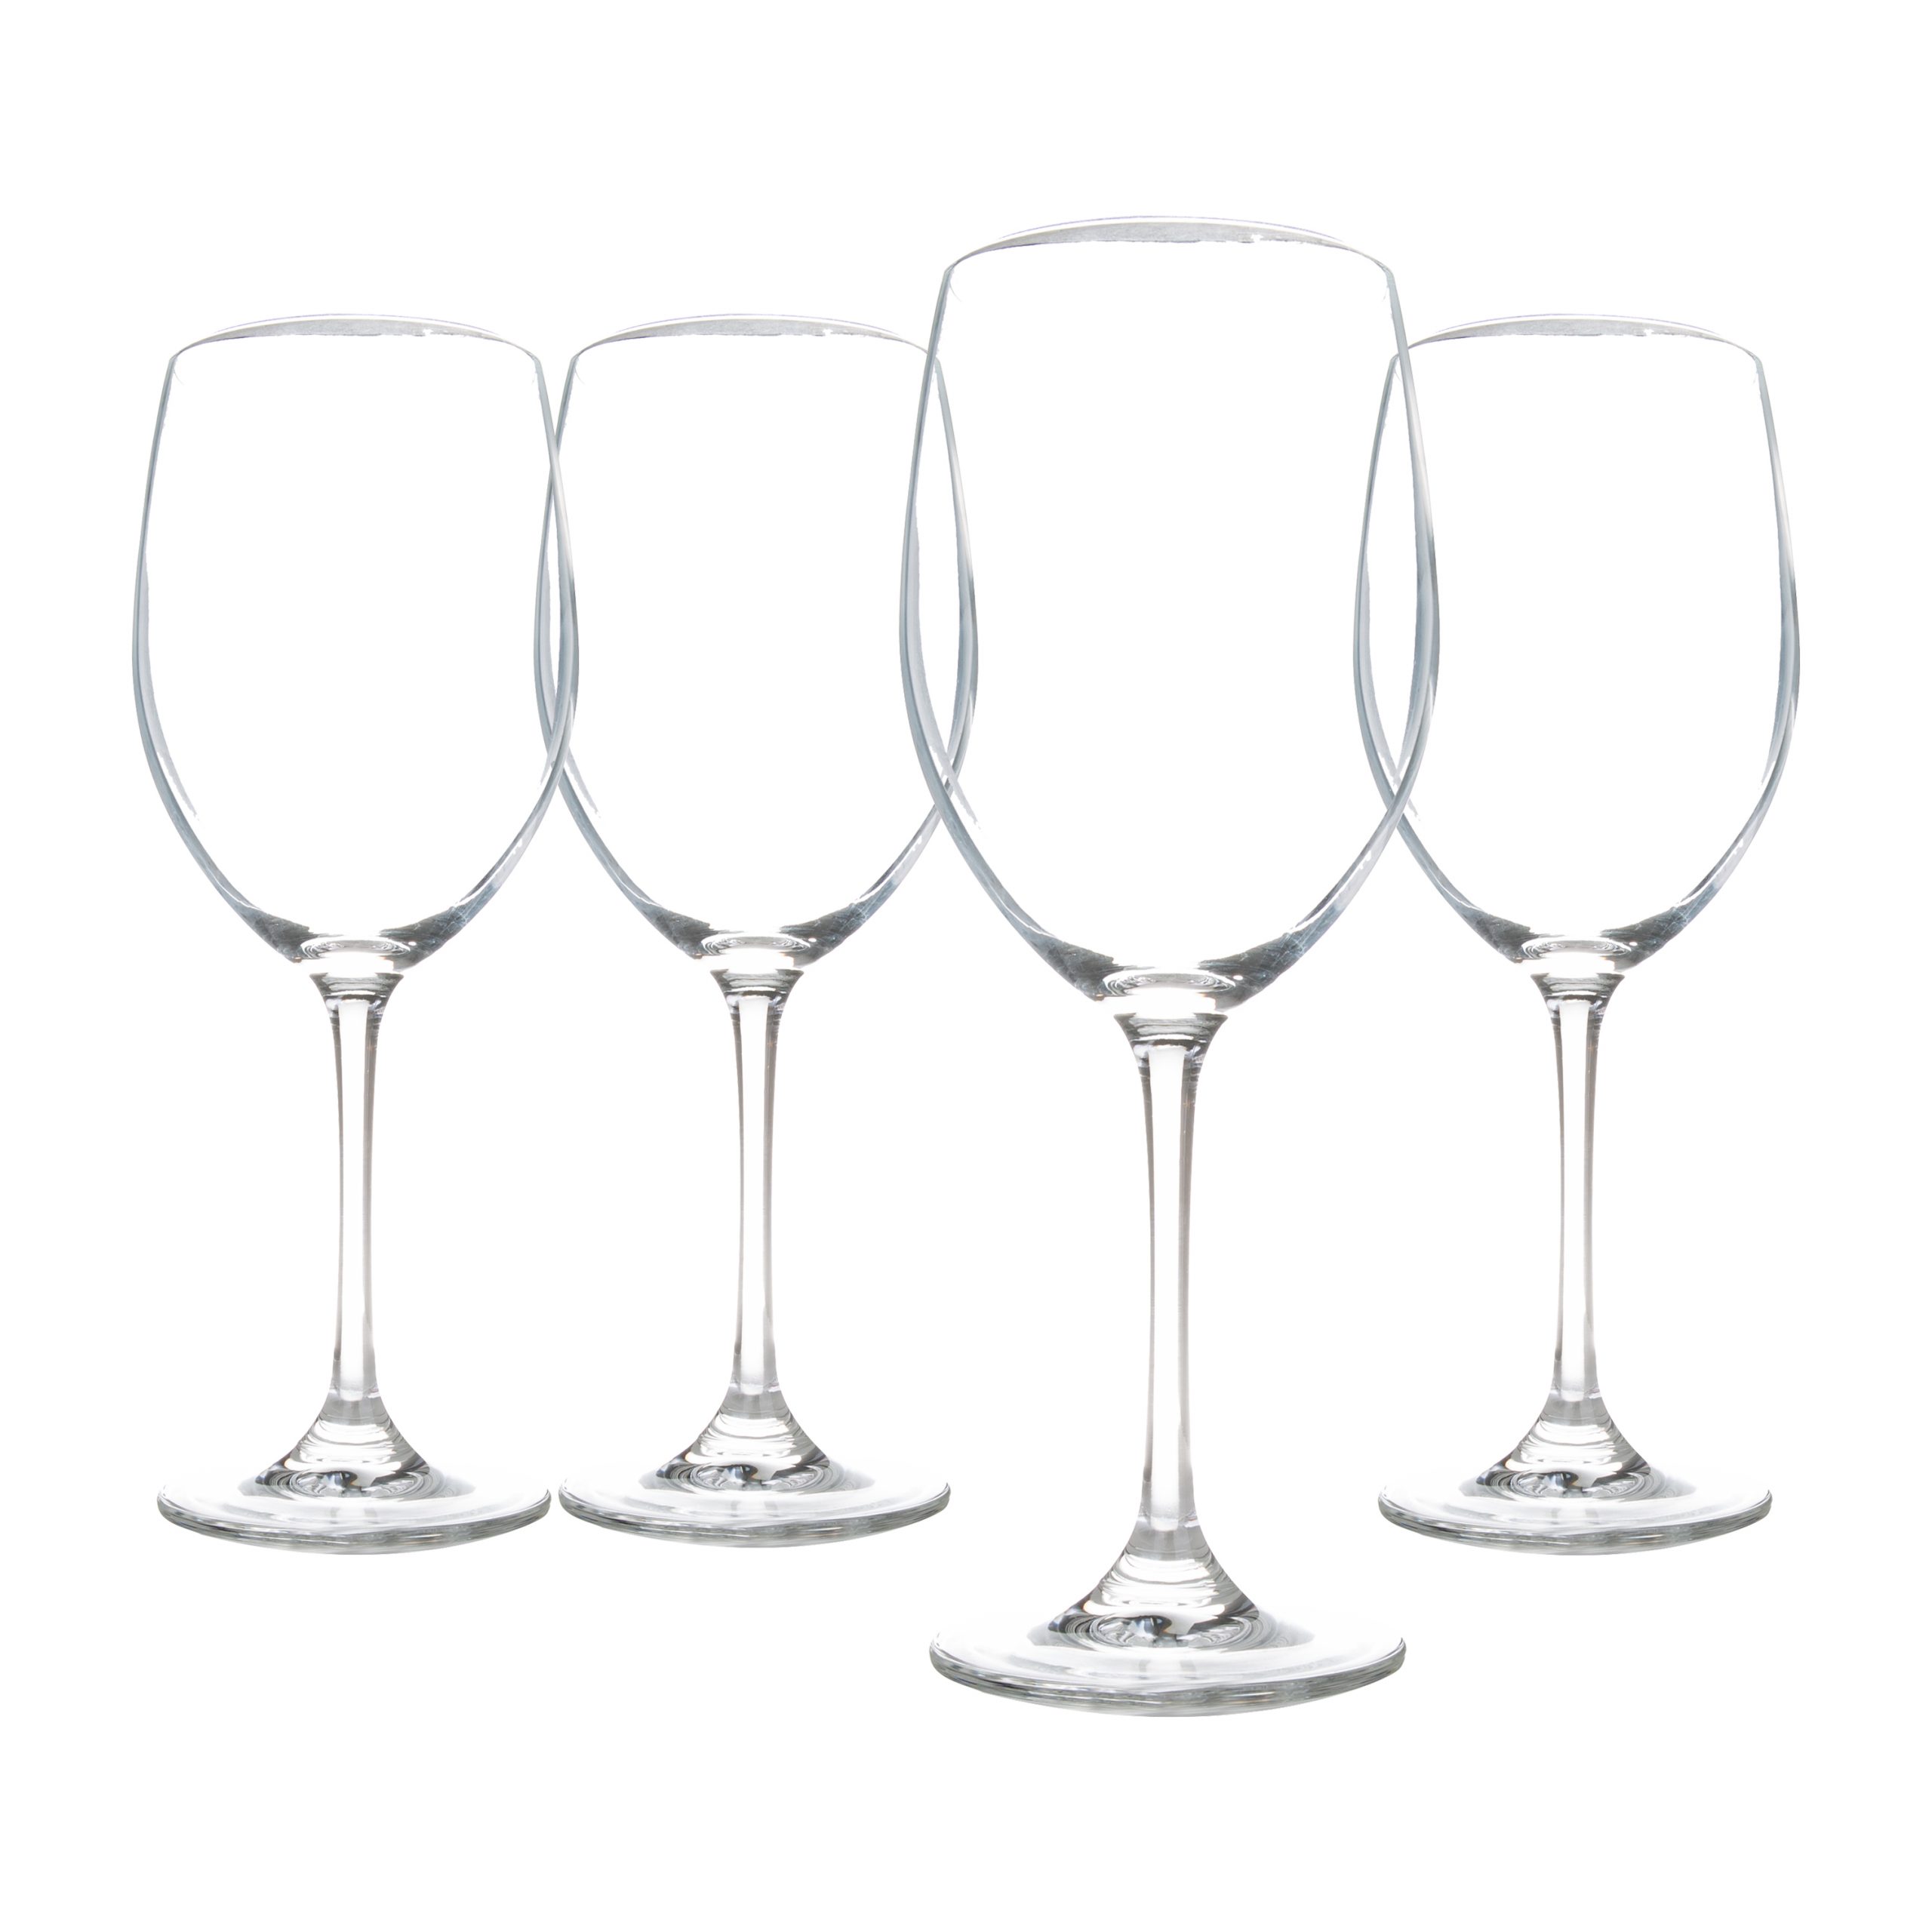 https://www.craftmastergrowlers.com/wp-content/uploads/2020/07/4-19oz-crystal-wine-glasses-scaled.jpg